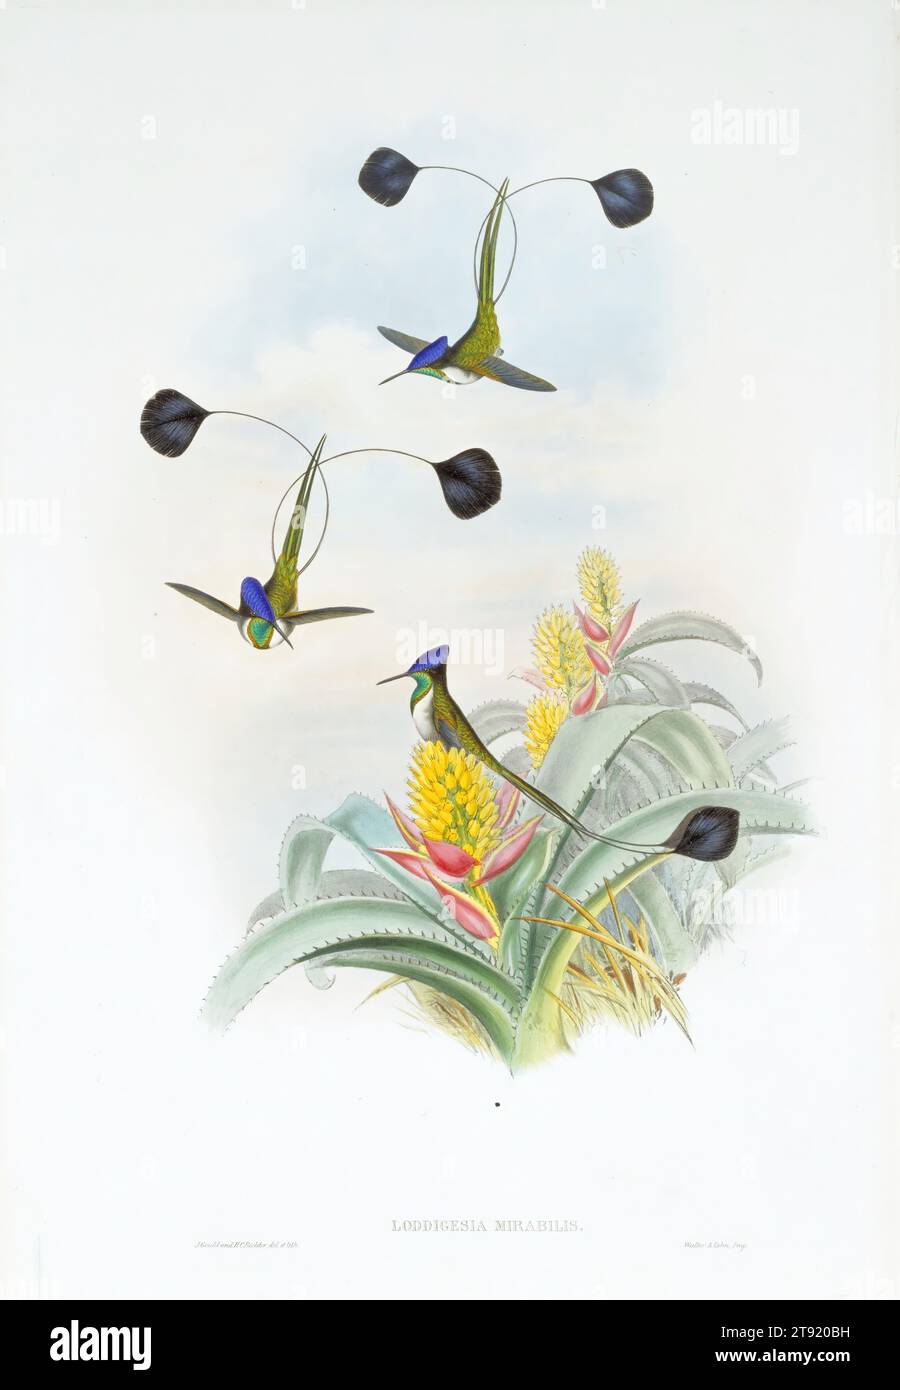 Plate 161, Vol. III. Loddigesia Mirabilis, 1849-1887, John Gould; Lithographer: Henry Constantine Richter; Printer: Walter & Cohn, British, 1804 - 1881, 18 1/2 x 11 3/4 in. (46.99 x 29.85 cm) (image), Hand-colored lithograph, England, 19th century Stock Photo